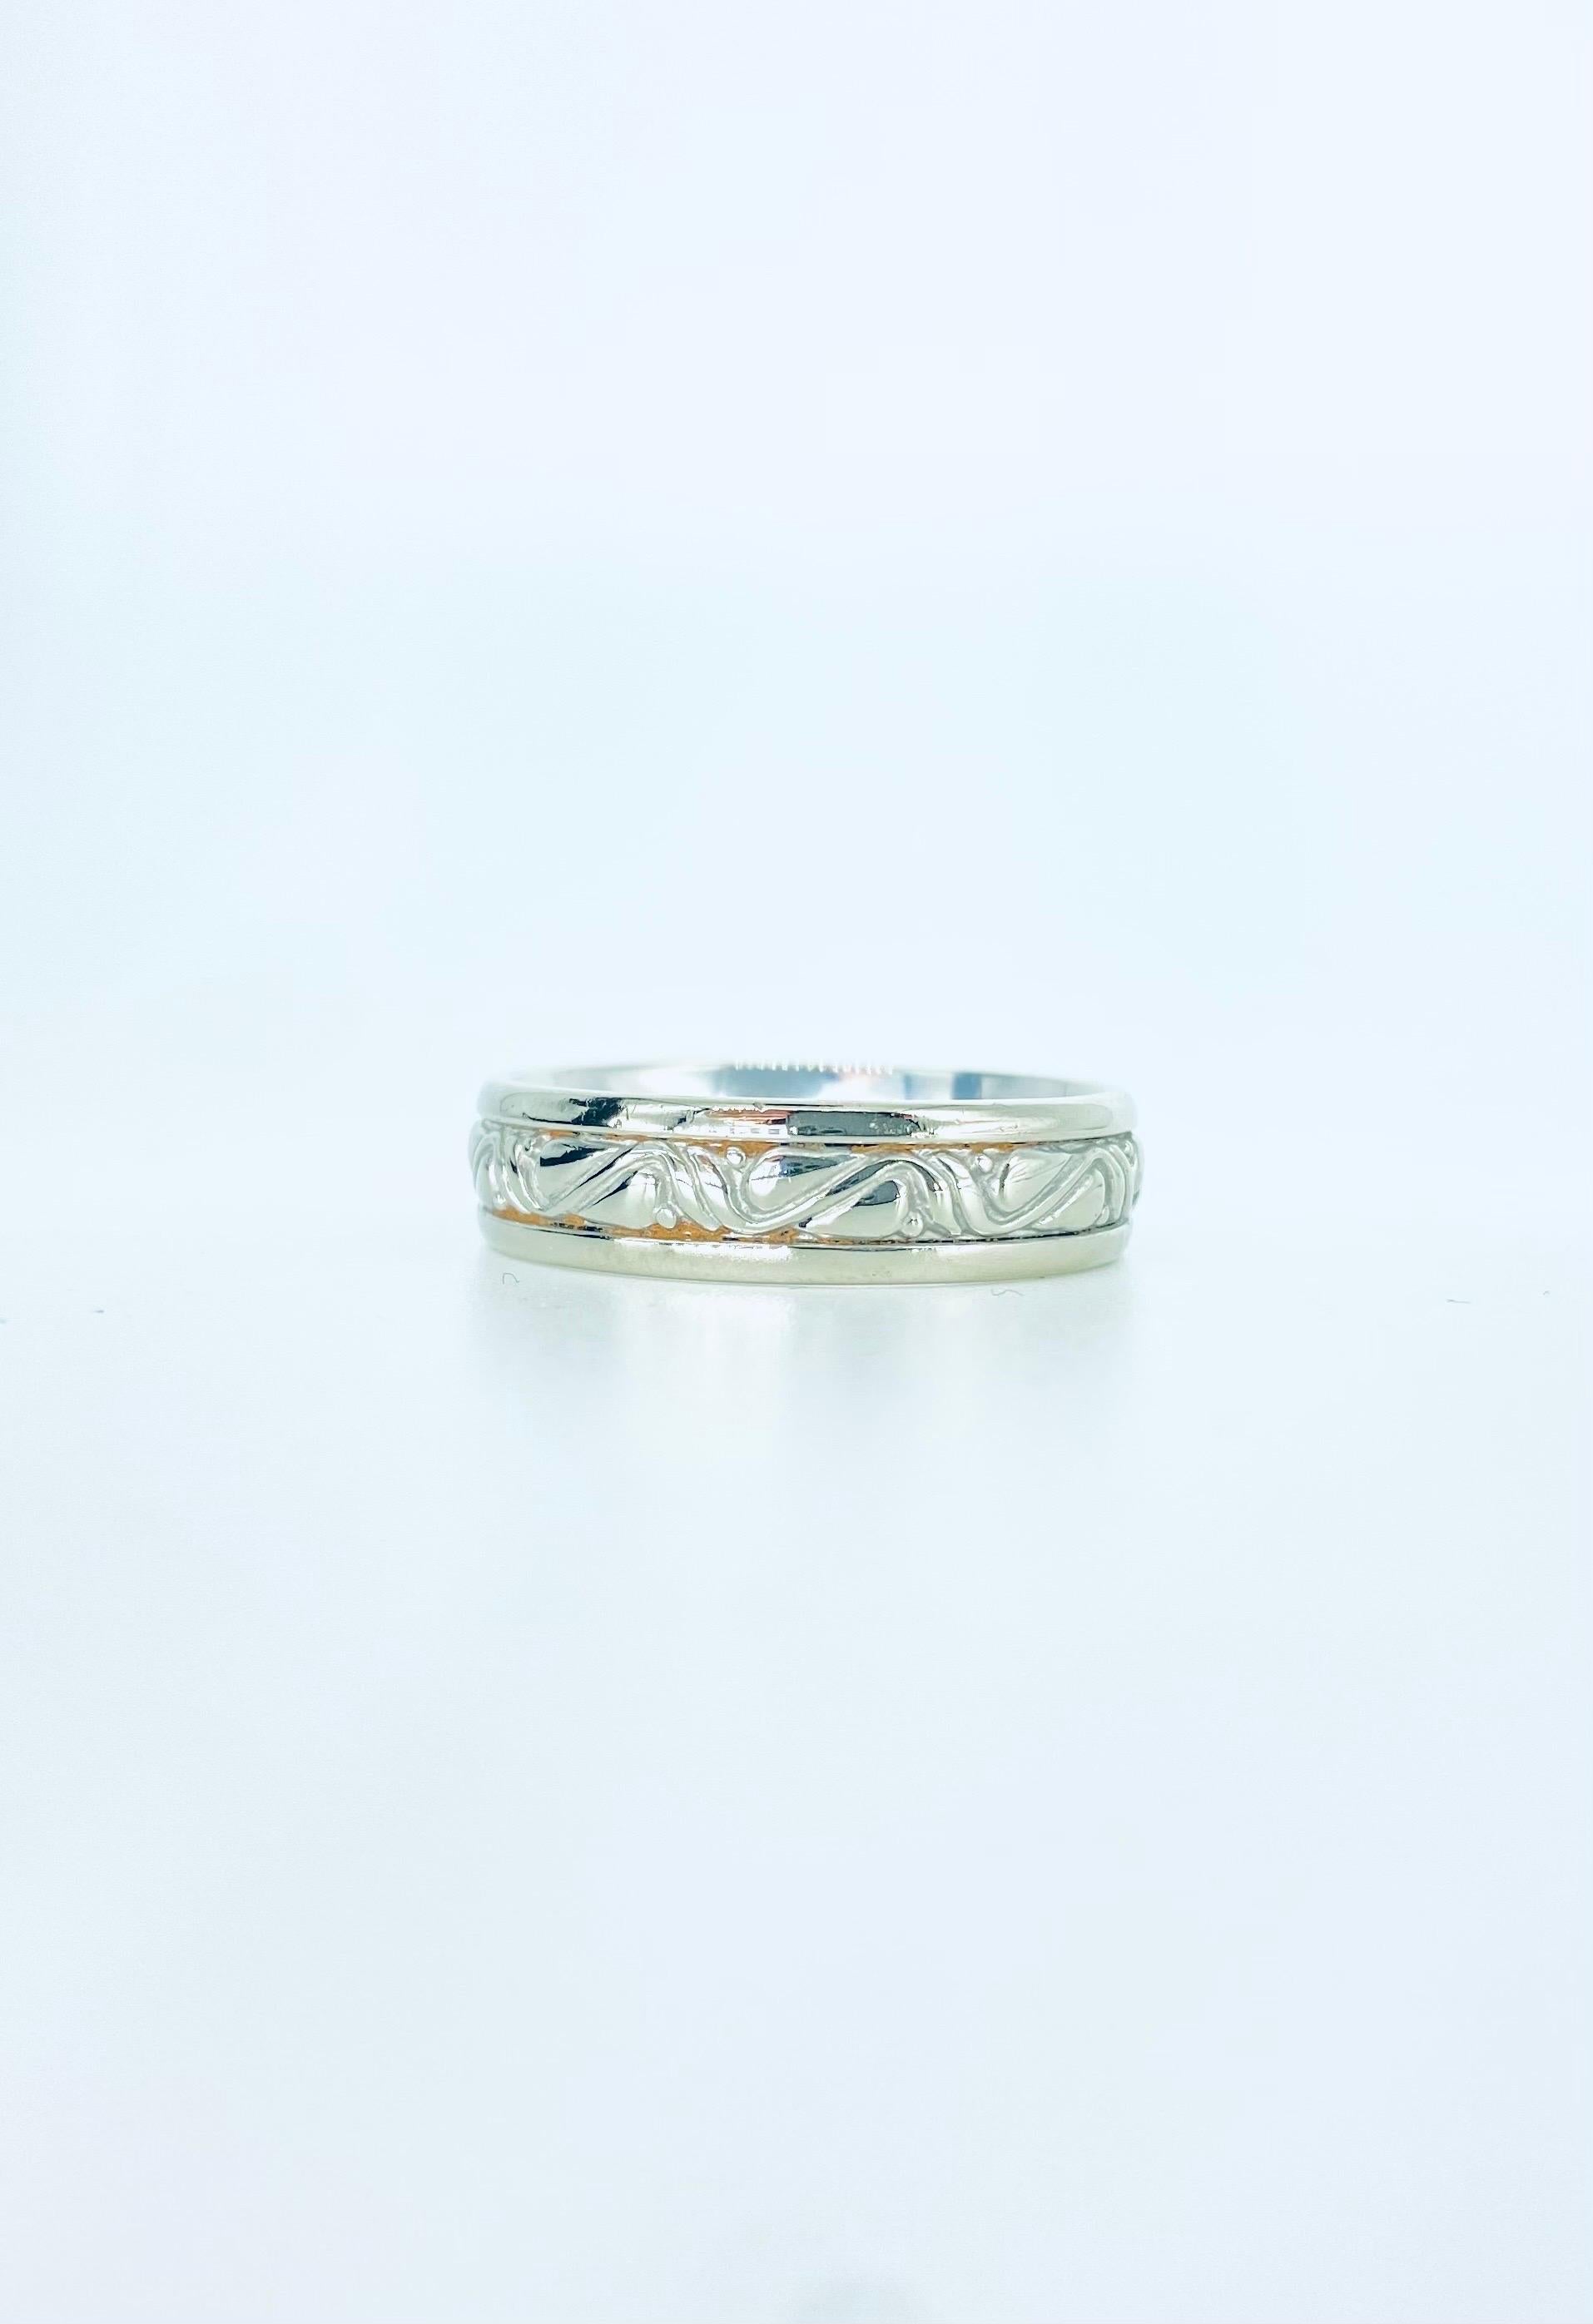 Artcarved Artistic Design Band Ring 14k White Gold In Excellent Condition For Sale In Miami, FL